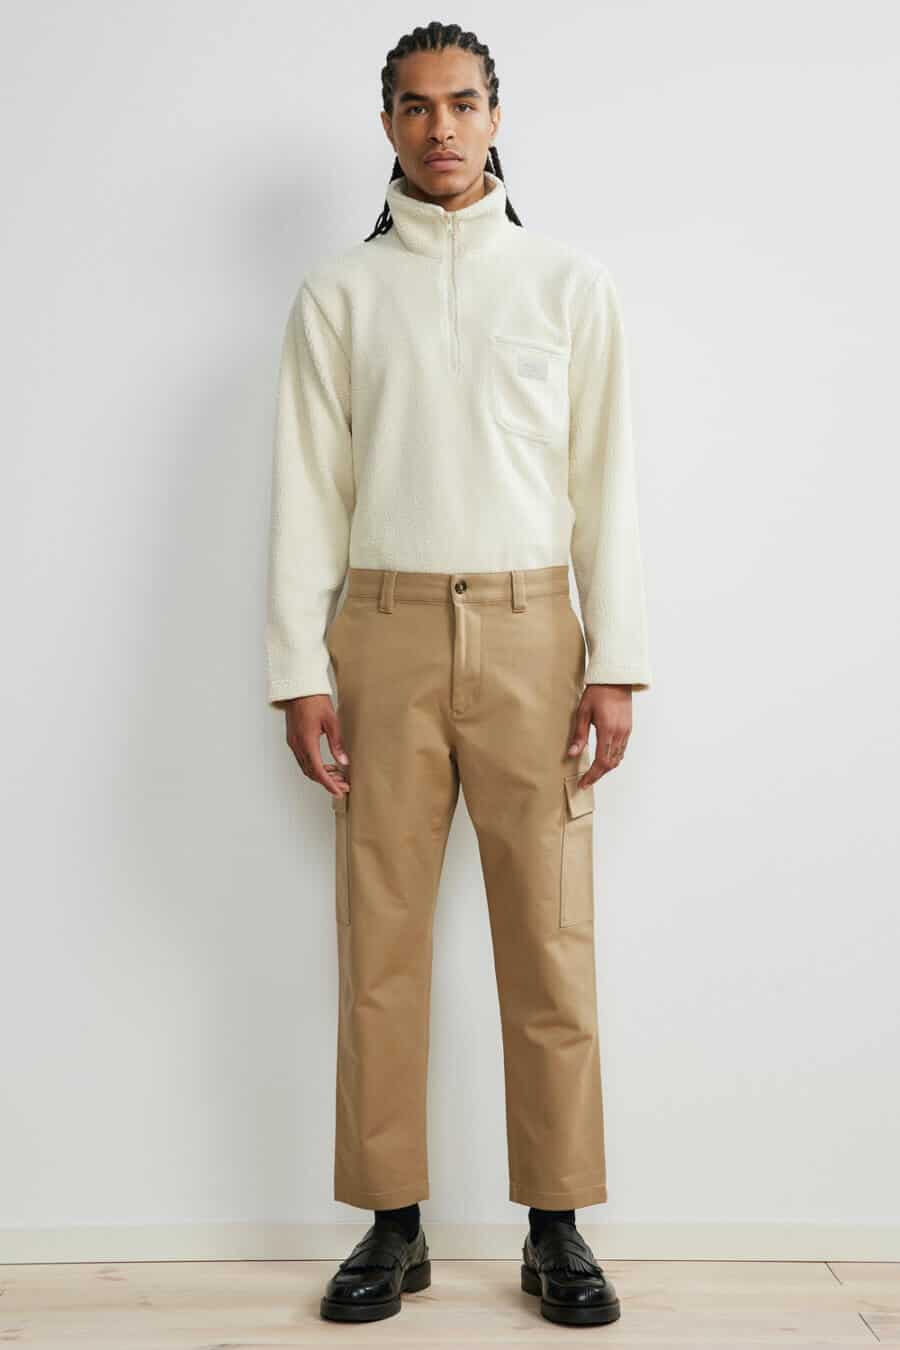 Men's khaki combat pants worn with a zip neck top and black loafers outfit